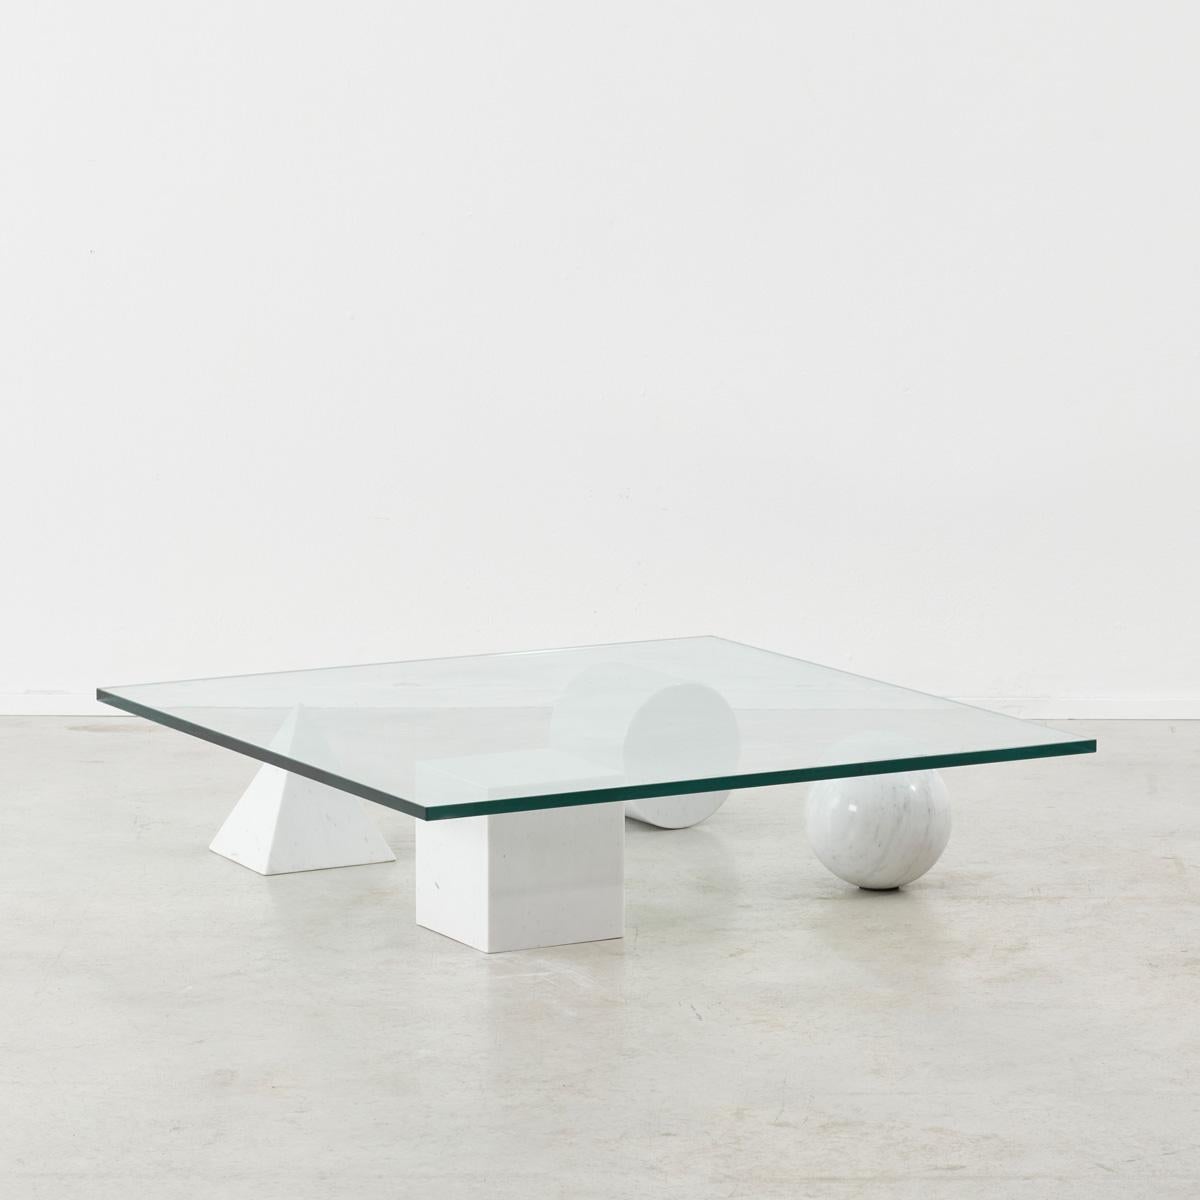 A stunning and sculptural Metafora coffee table designed by Lella and Massimo Vignelli. Inspired by the four forms of Euclidean geometery, the cube, the pyramid, the cylinder and the sphere, the four elements can be positioned freely for a unique